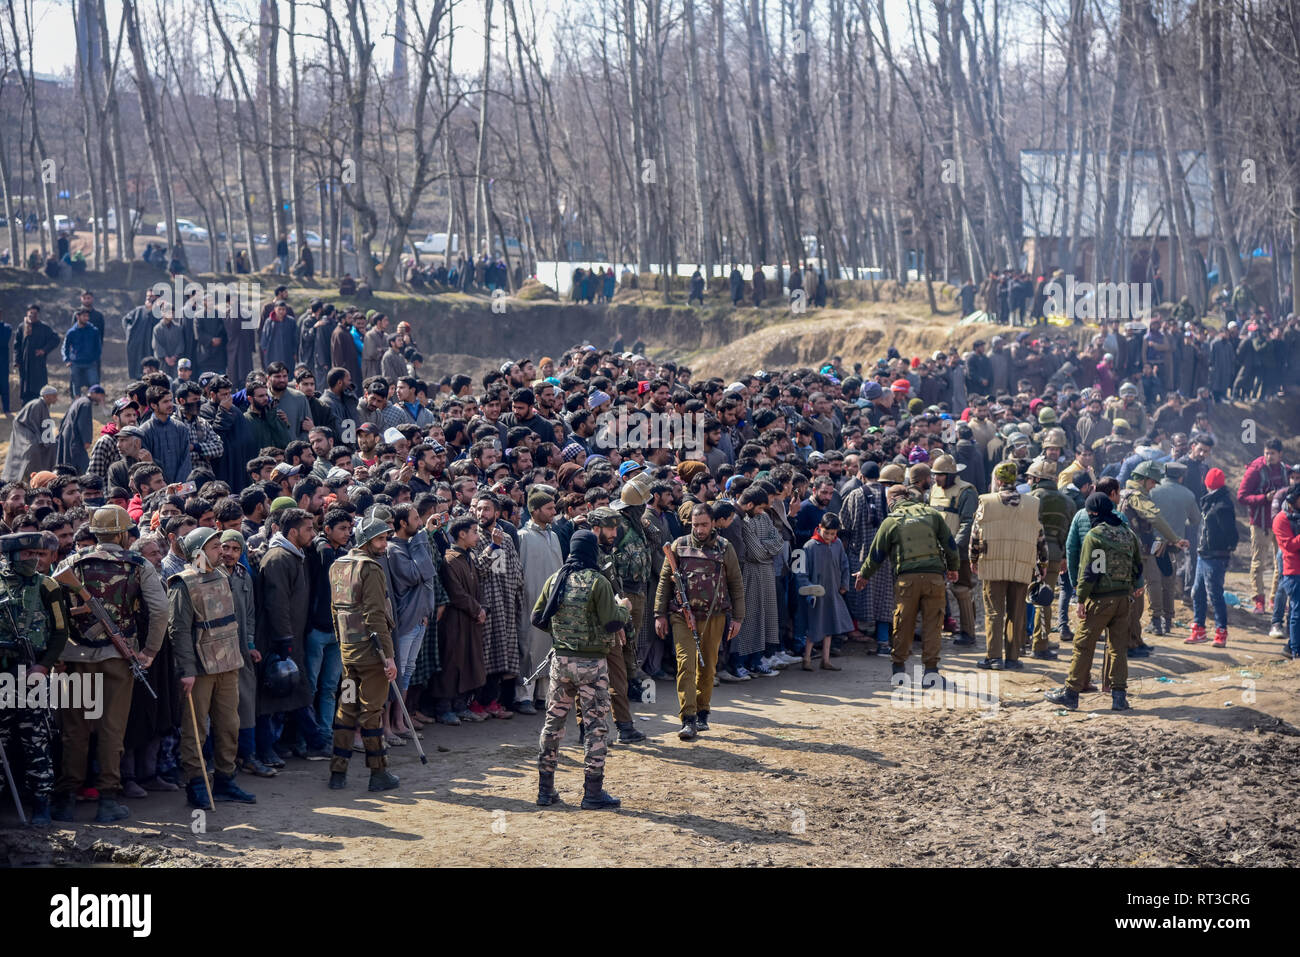 Indian army men are seen standing on guard as the kashmiri villagers gathered near the wreckage of an aircraft that crashed in Budgam area. A civilian and six Indian Air Force personnel were killed after a Mi-17 chopper crashed near Garend Kalan village in Budgam which is some 30 Kms from Summer Capital Srinagar Kashmir. Stock Photo